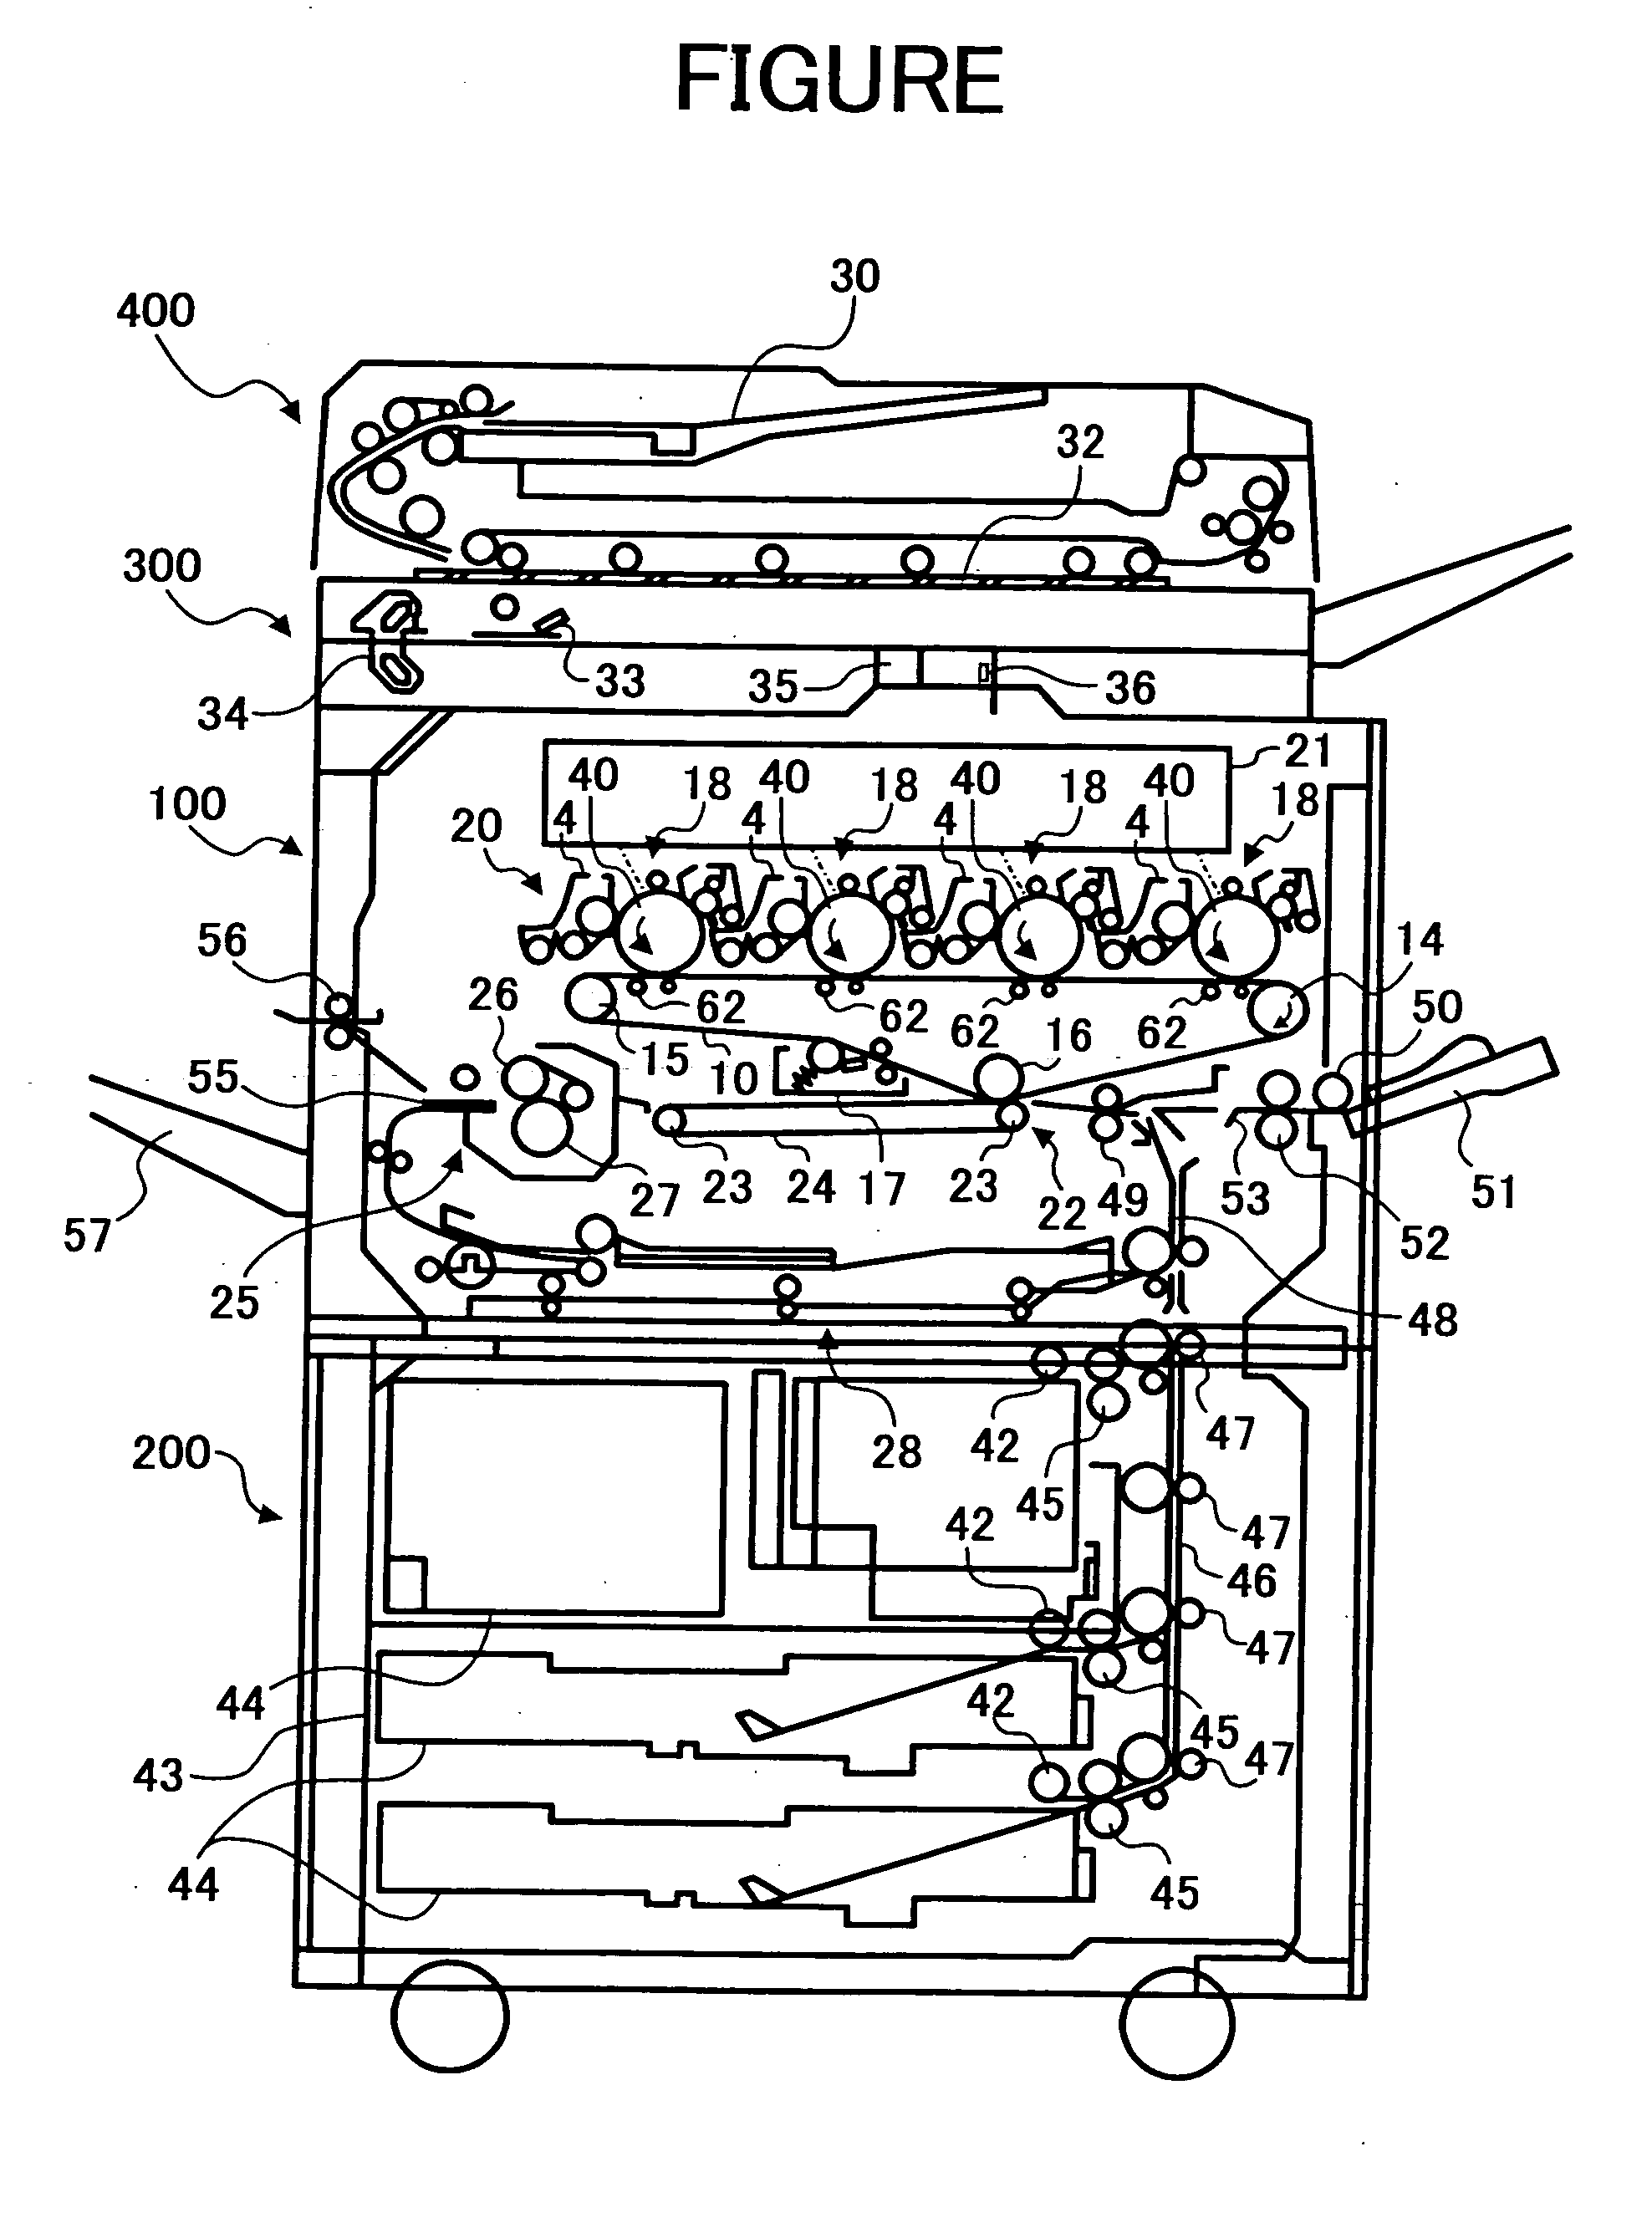 Toner, and developer, image developer and image forming apparatus using the toner